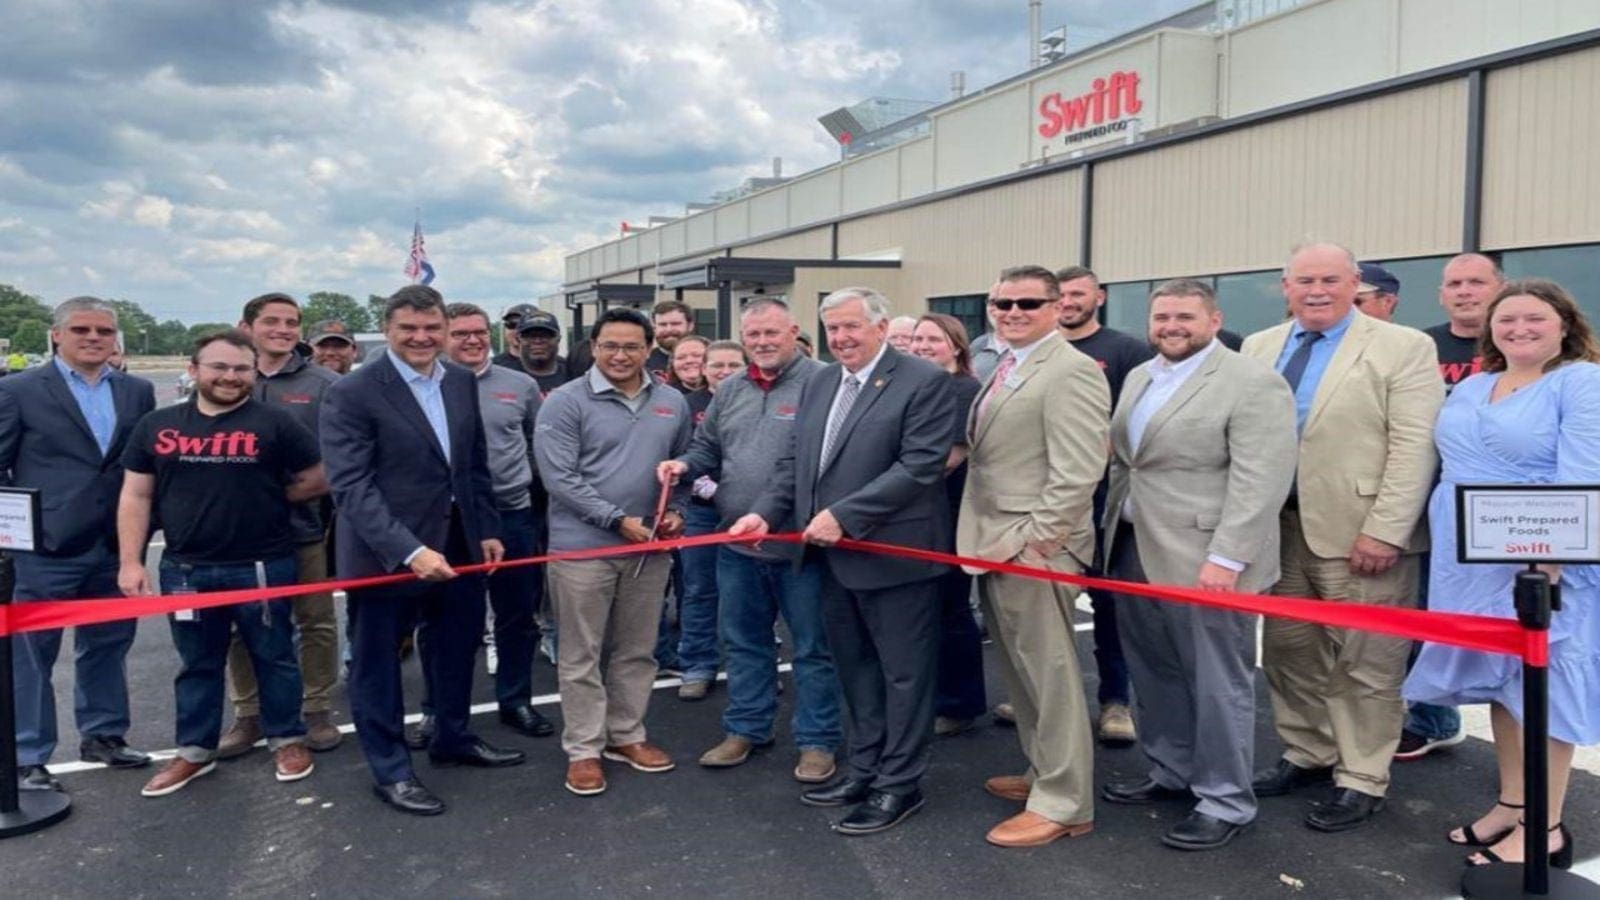 JBS subsidiary opens new bacon plant in Missouri as Heck UK invests in sausage and burger capacity expansion